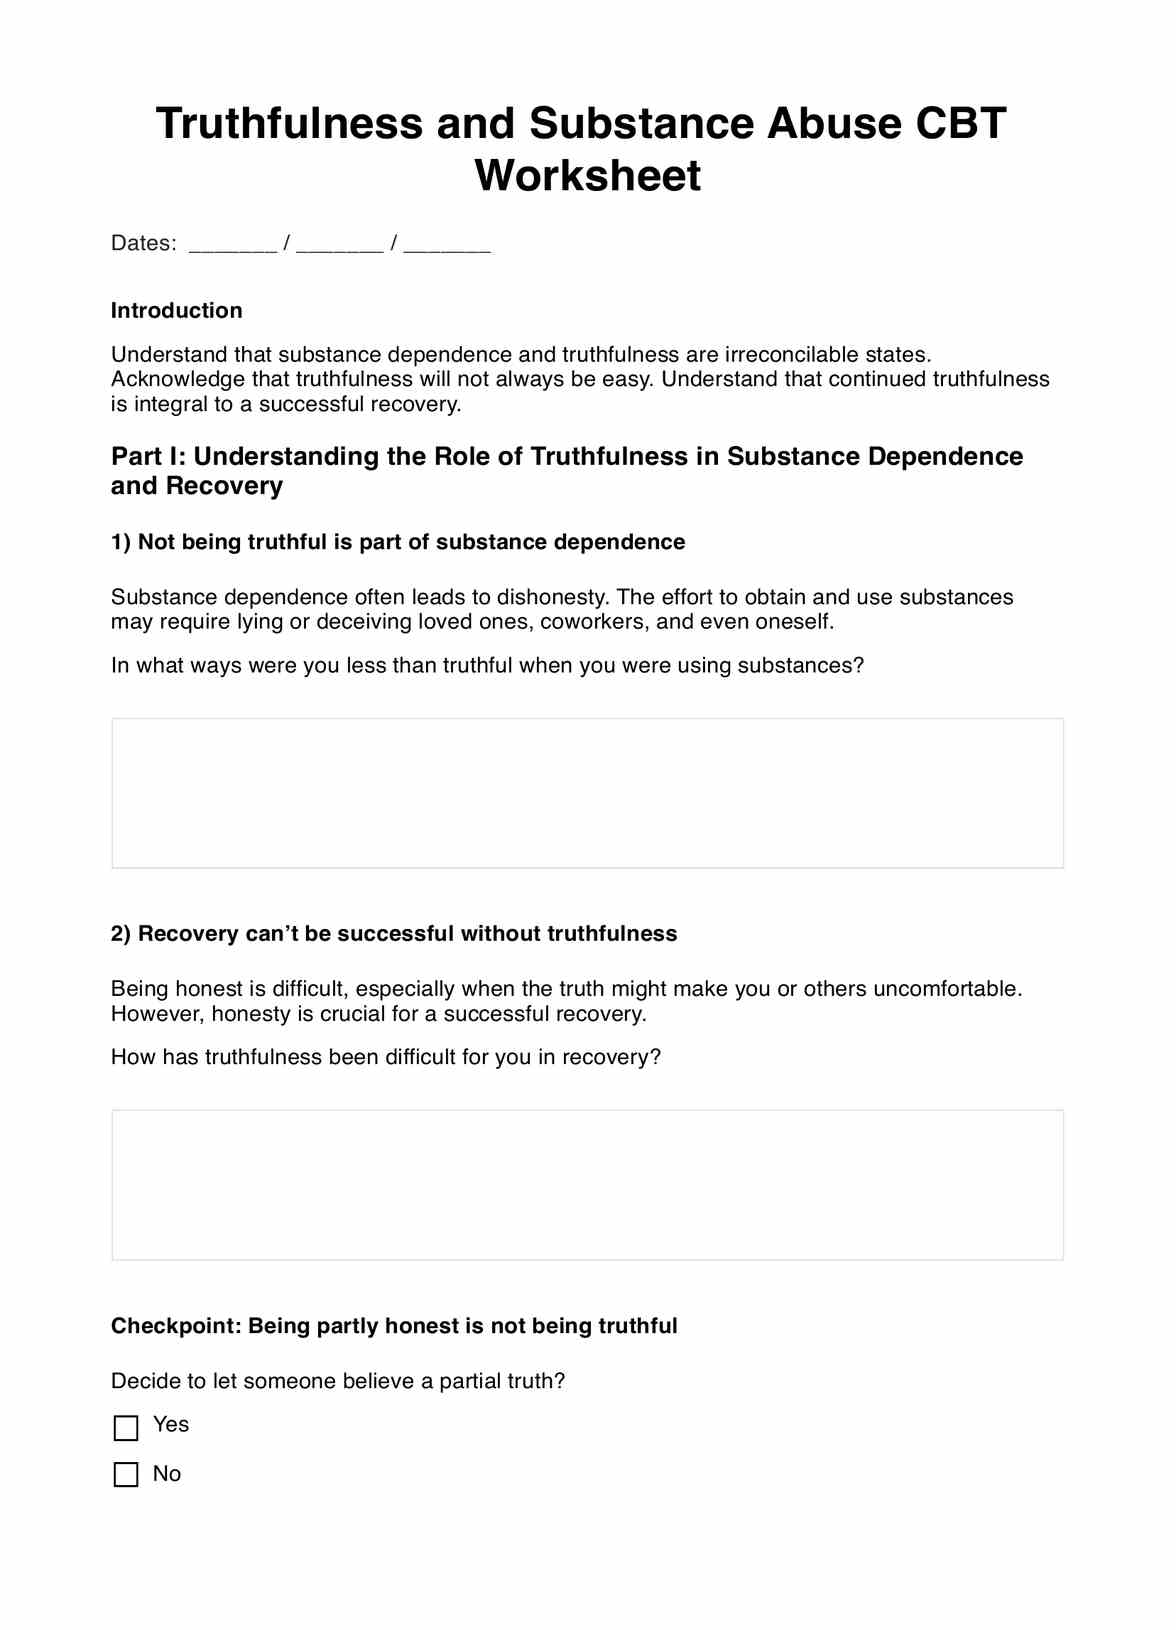 Truthfulness and Substance Abuse CBT Worksheets PDF Example